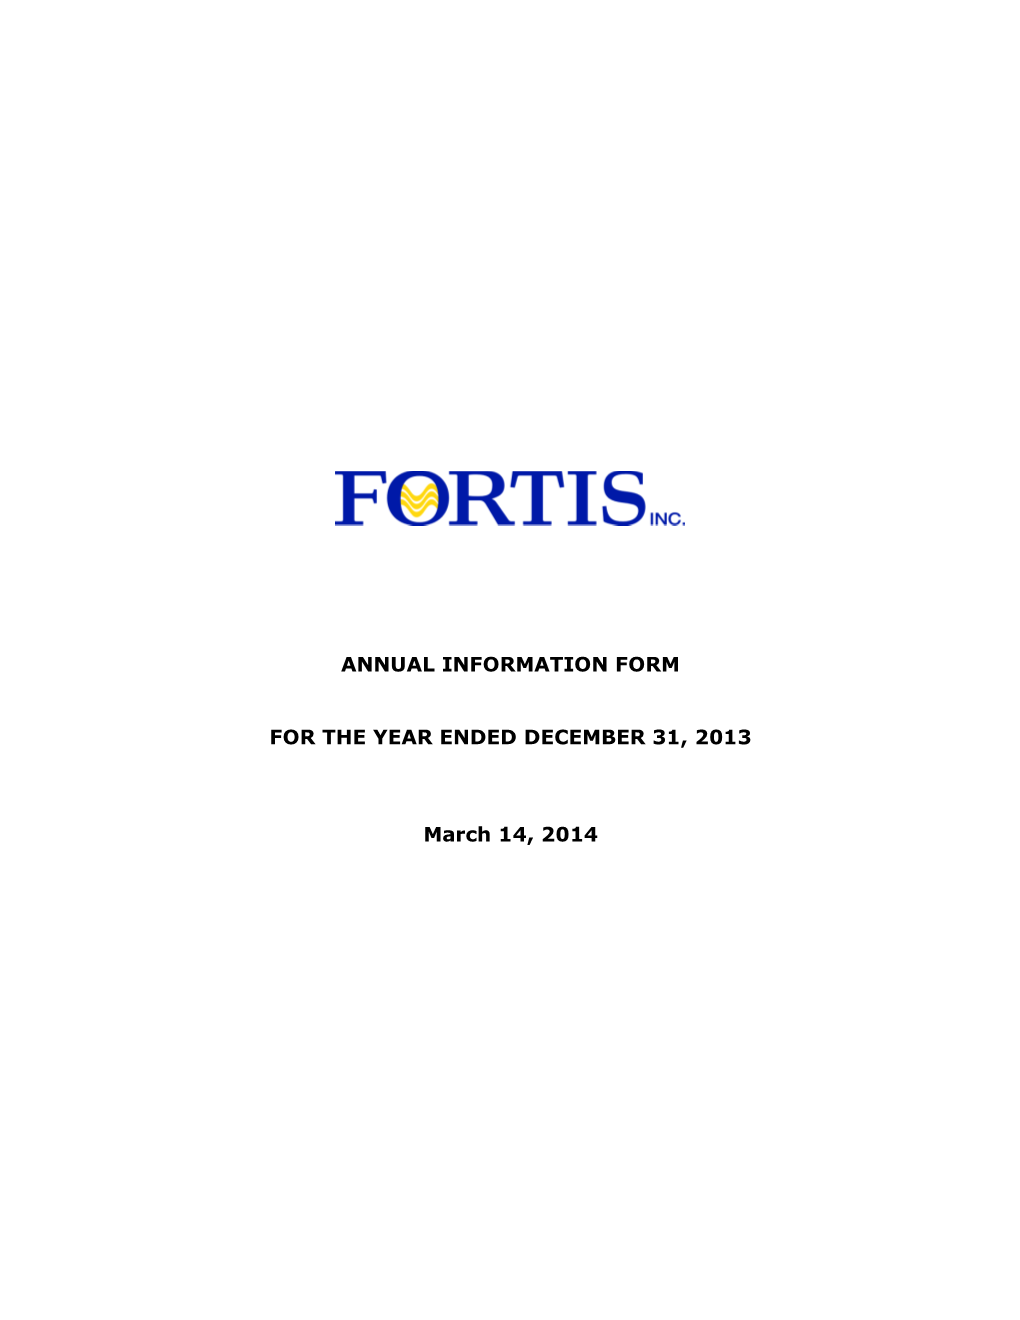 Annual Information Form for the Year Ended December 31, 2013